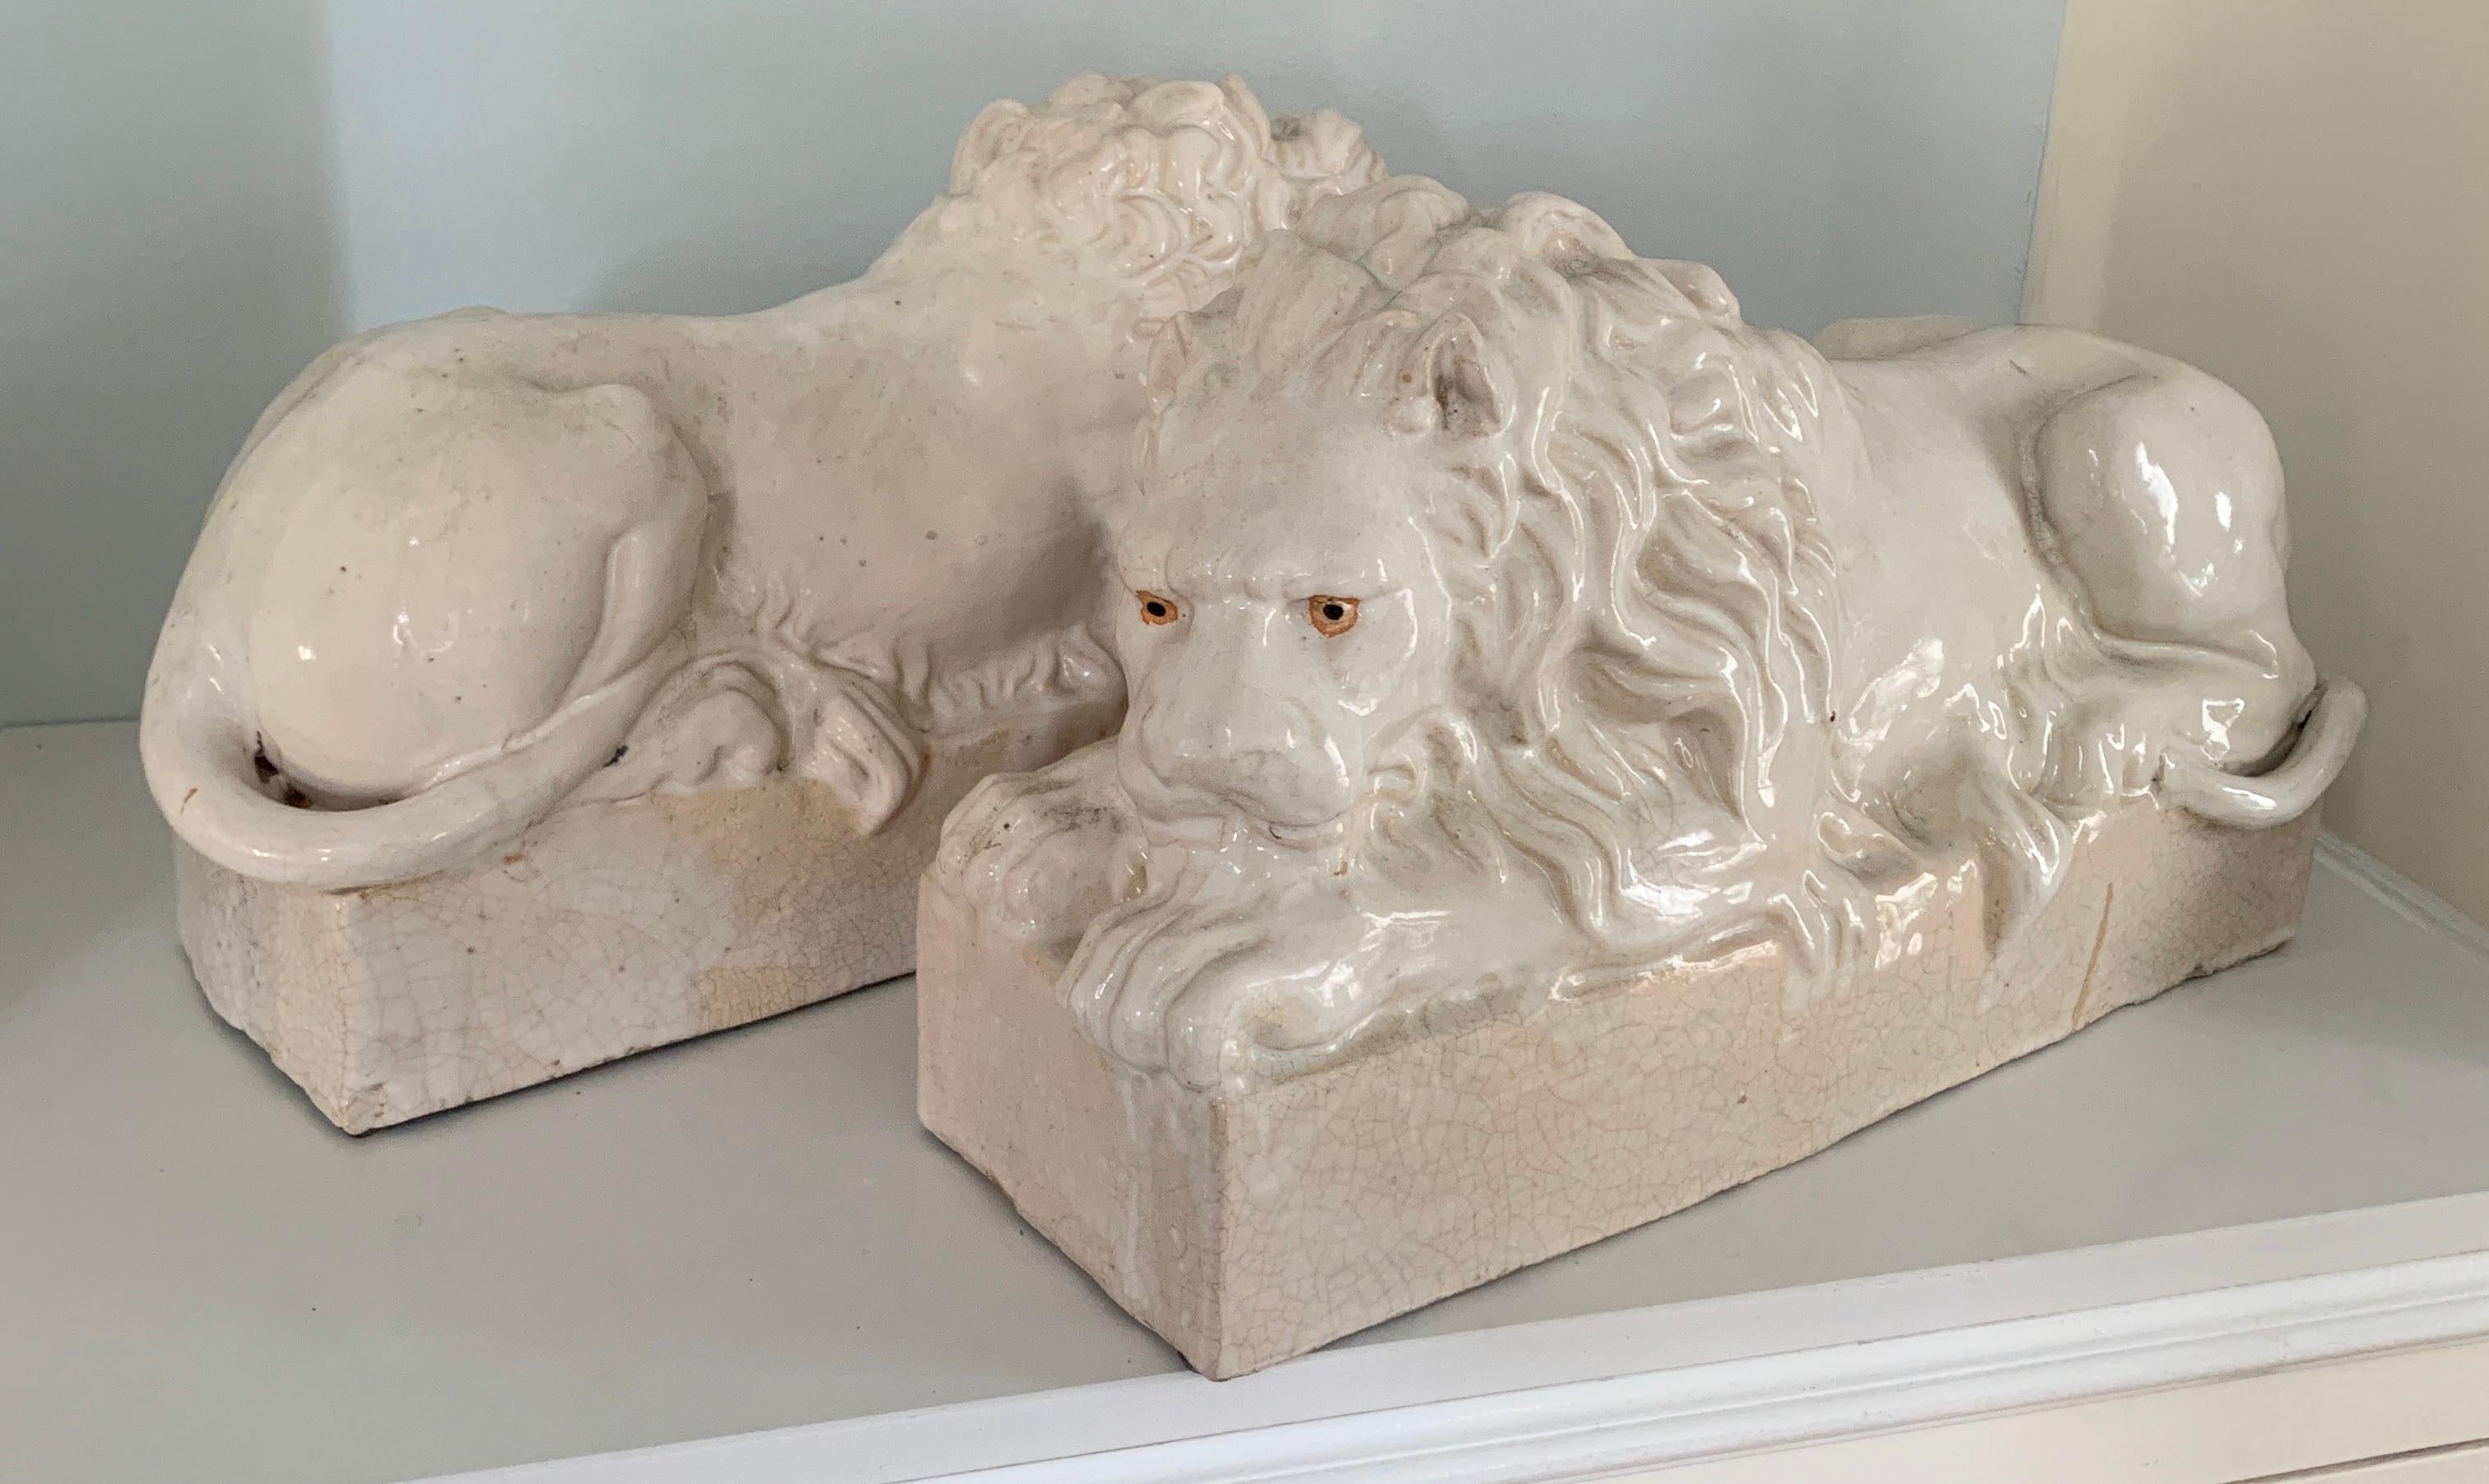 Pair of very large reclining lions in terra-cotta from Italy. The pair are well suited for indoor or outdoor (preferably covered) - flanking a fireplace or on your favorite shelf. A wonderful glazed texture and patina.